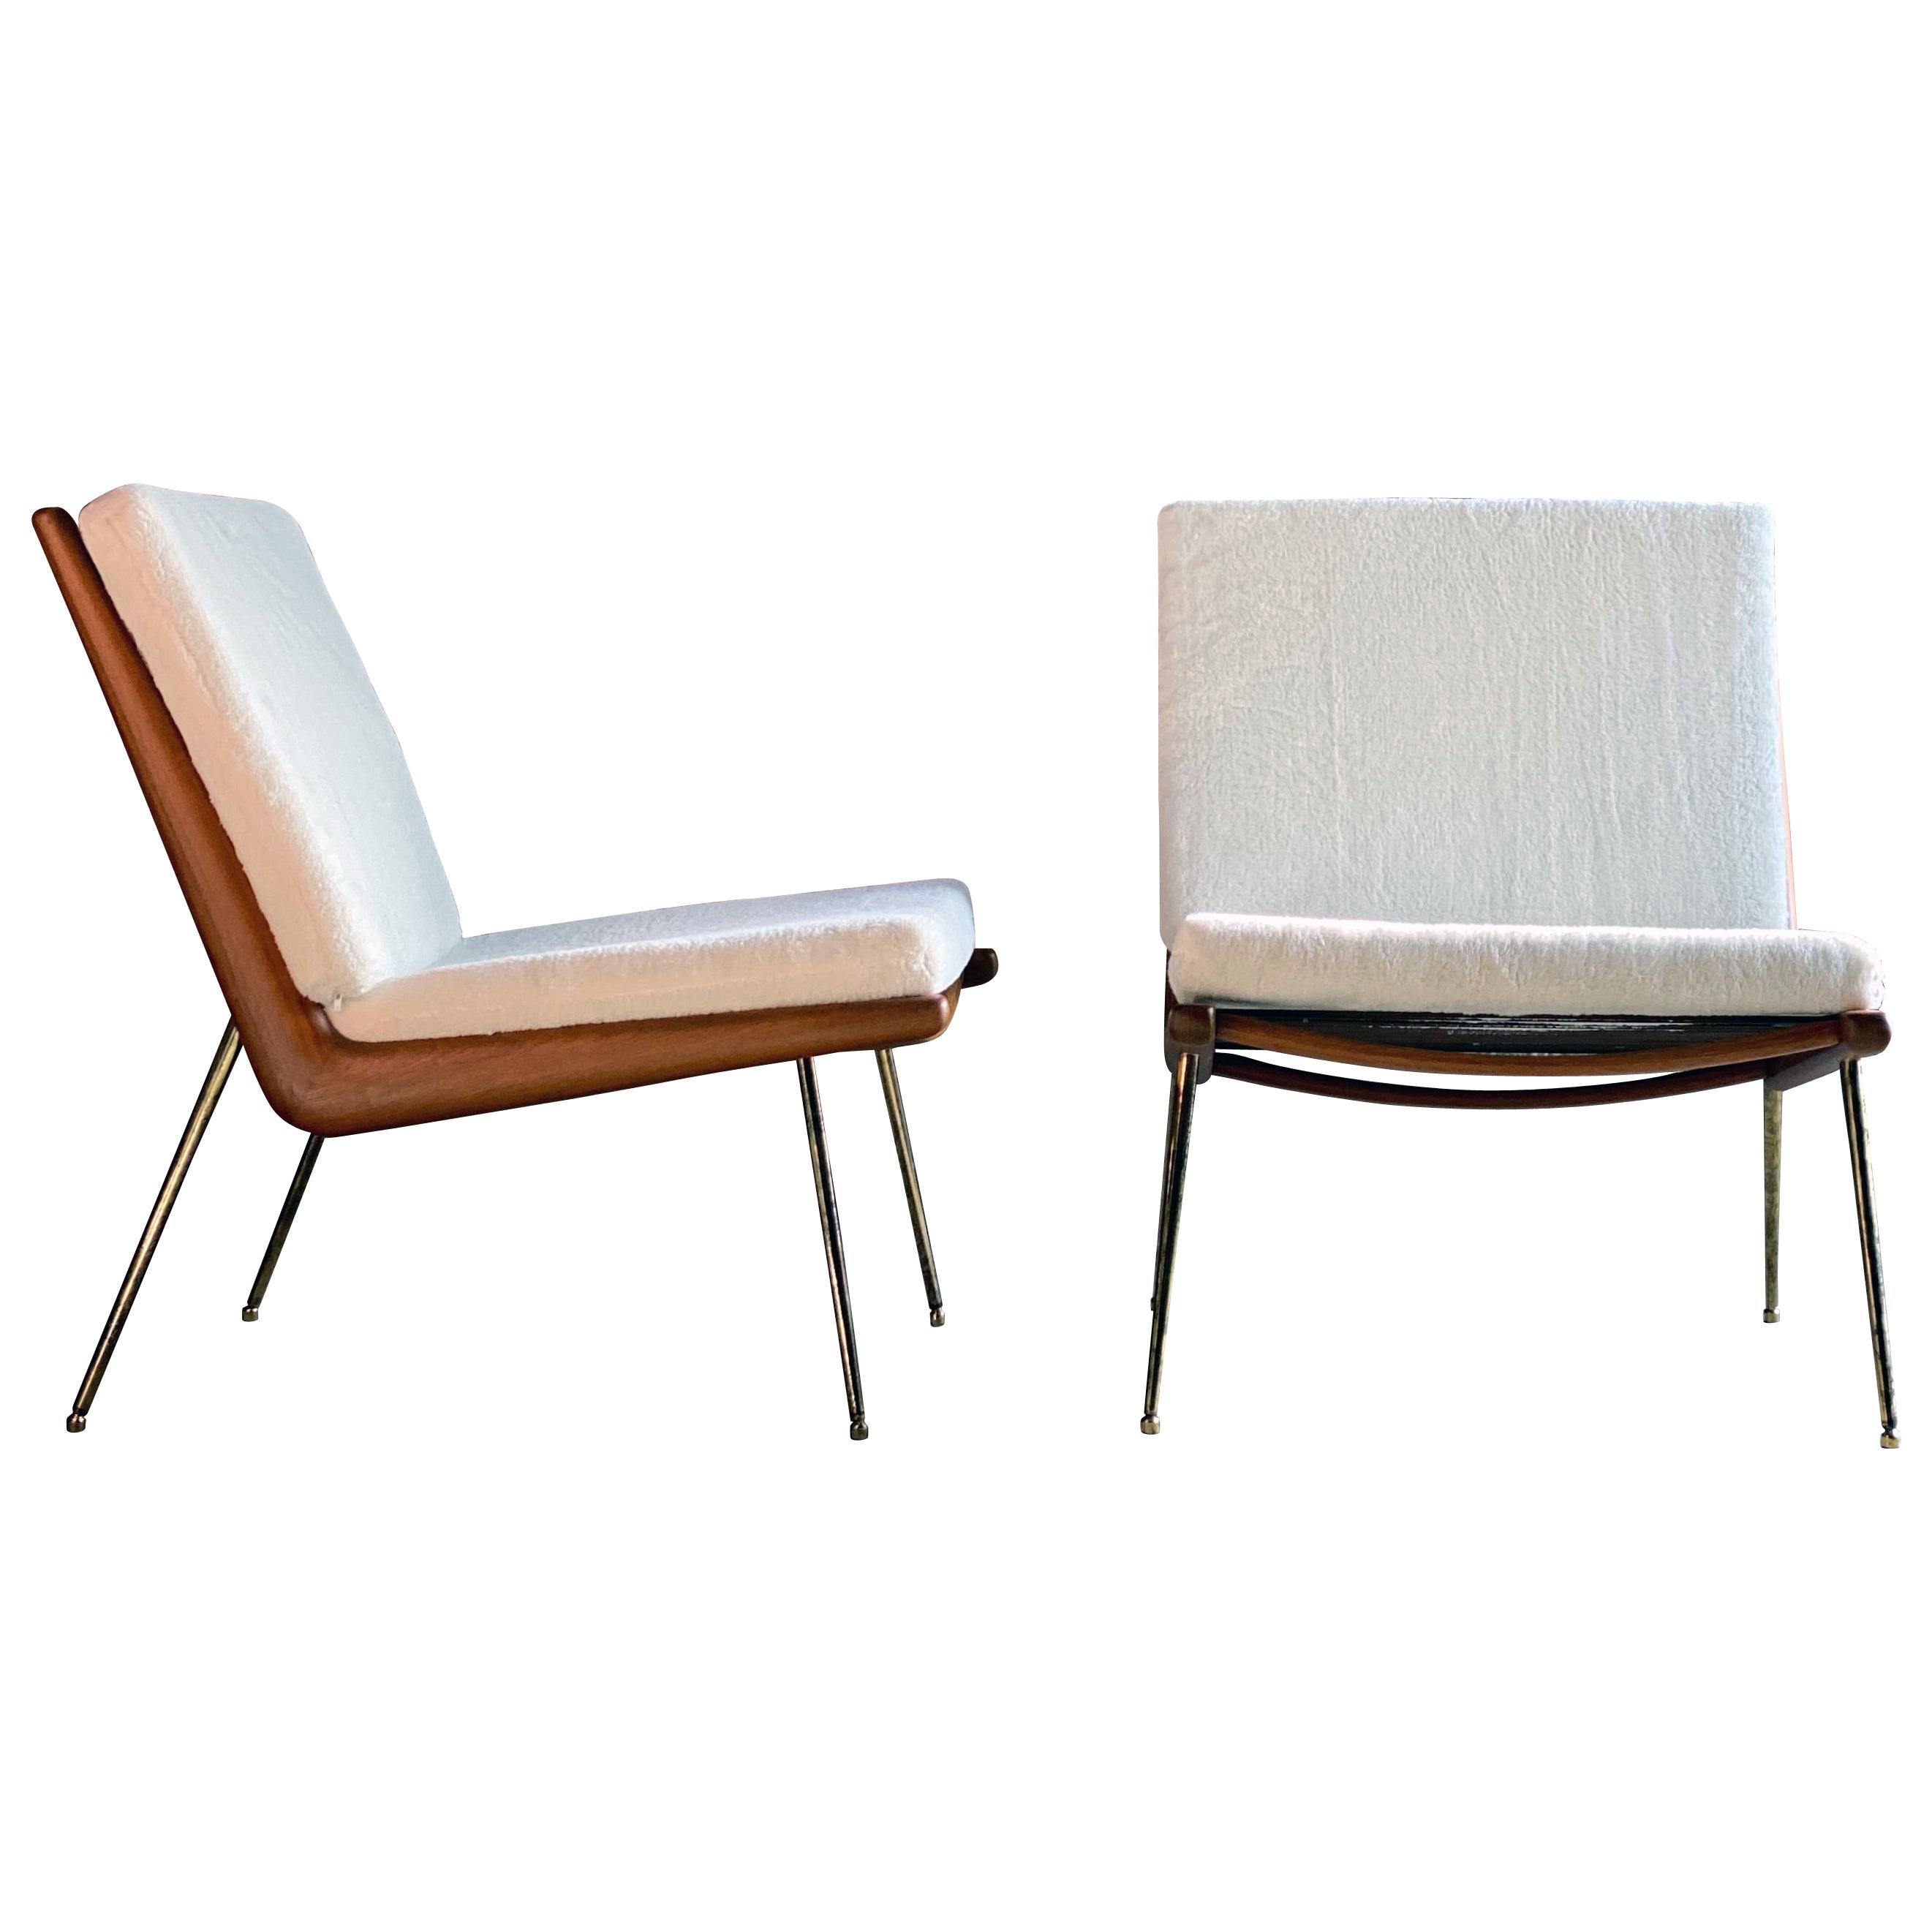 Boomerang chairs France & Son Pair of Peter Hvidt & Orla Mølgaard Nielsen, 1950s

A pair of Boomerang chairs by Peter Hvidt and Orla Mølgaard Nielsen manufactured by France & Son, Denmark, the teak frames sit on brass-plated legs with sabots, The